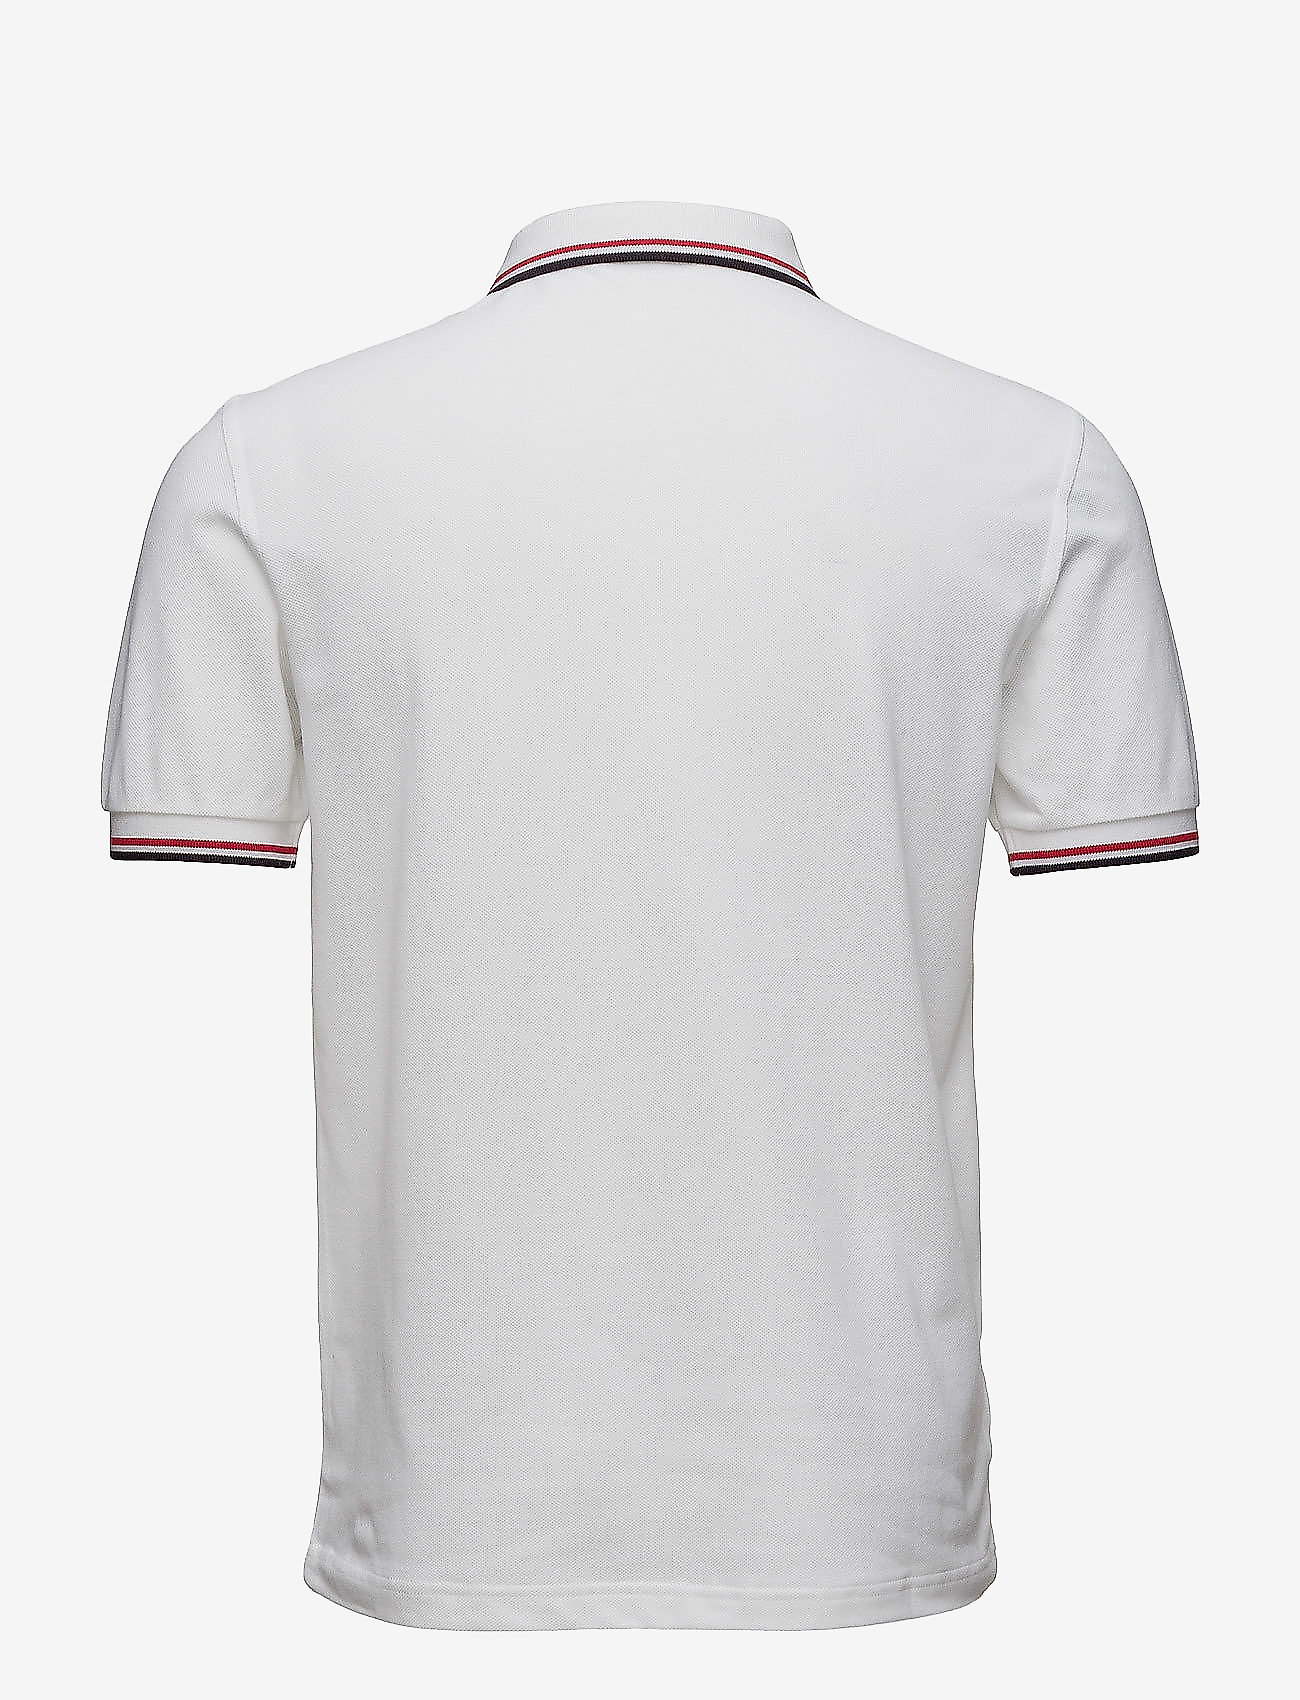 Fred Perry - TWIN TIPPED FP SHIRT - kurzärmelig - white/red - 1